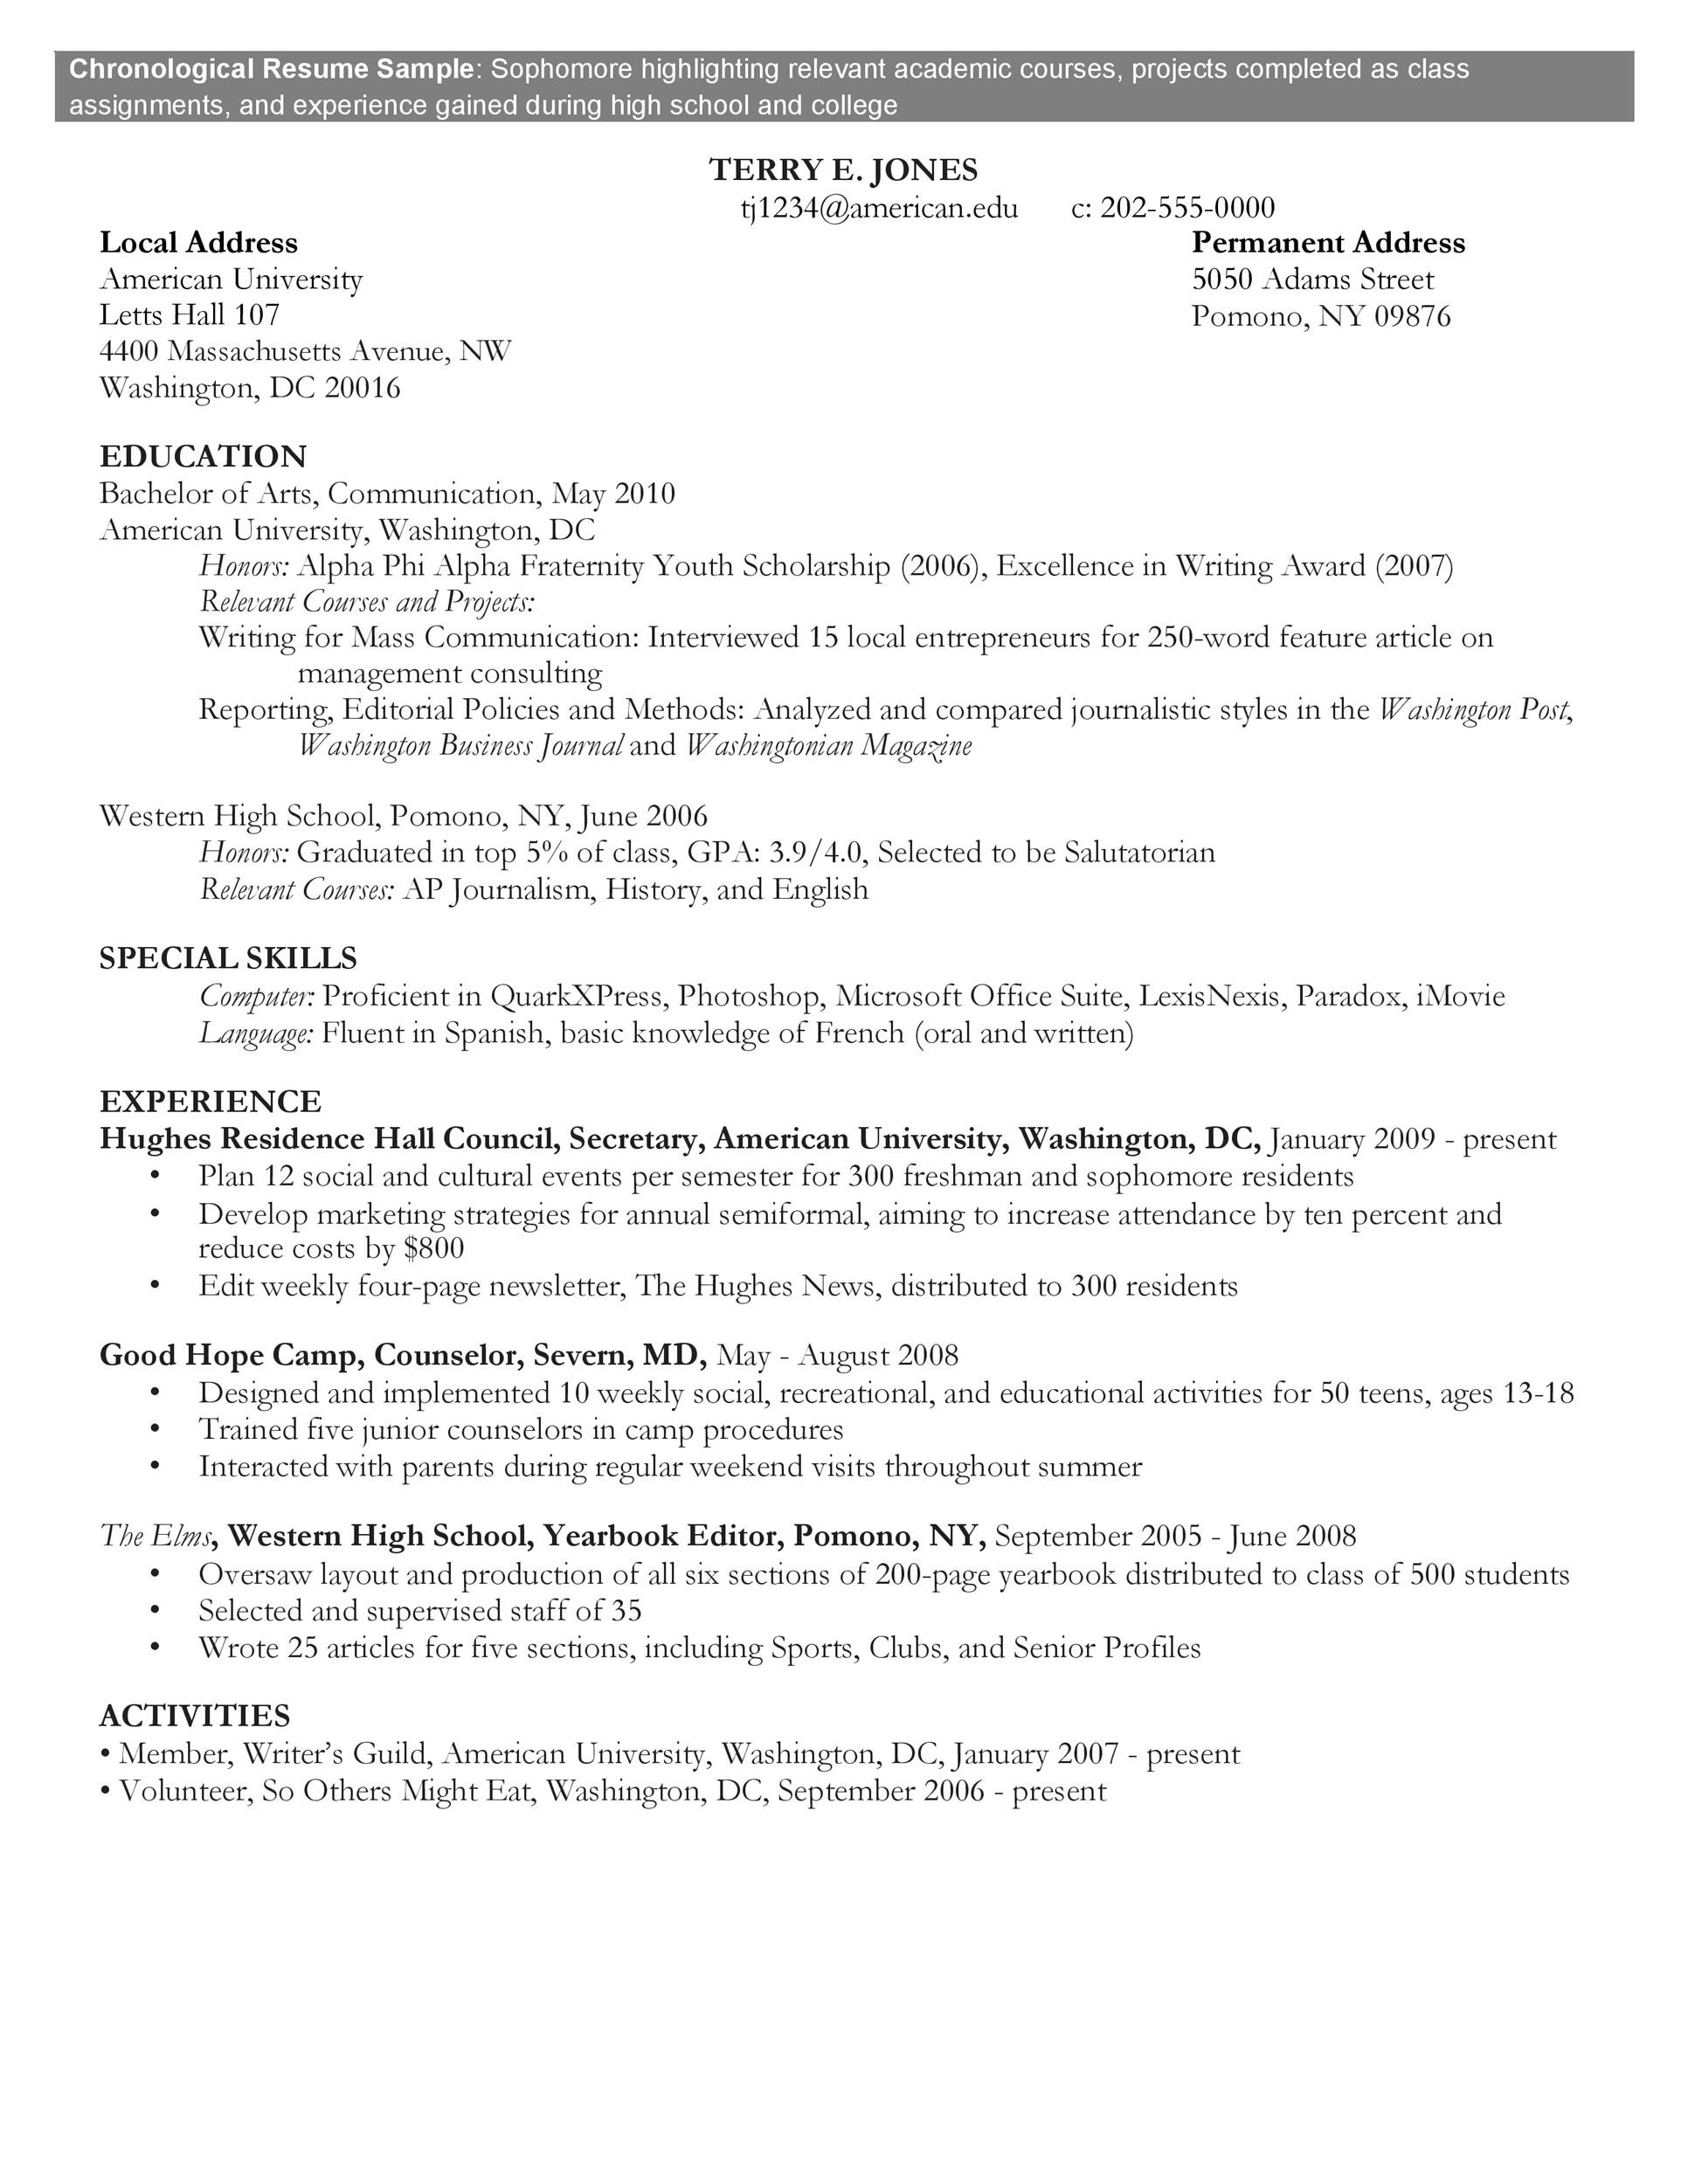 Resume Summary Samples for College Freshman 50 College Student Resume Templates (& format) á Templatelab